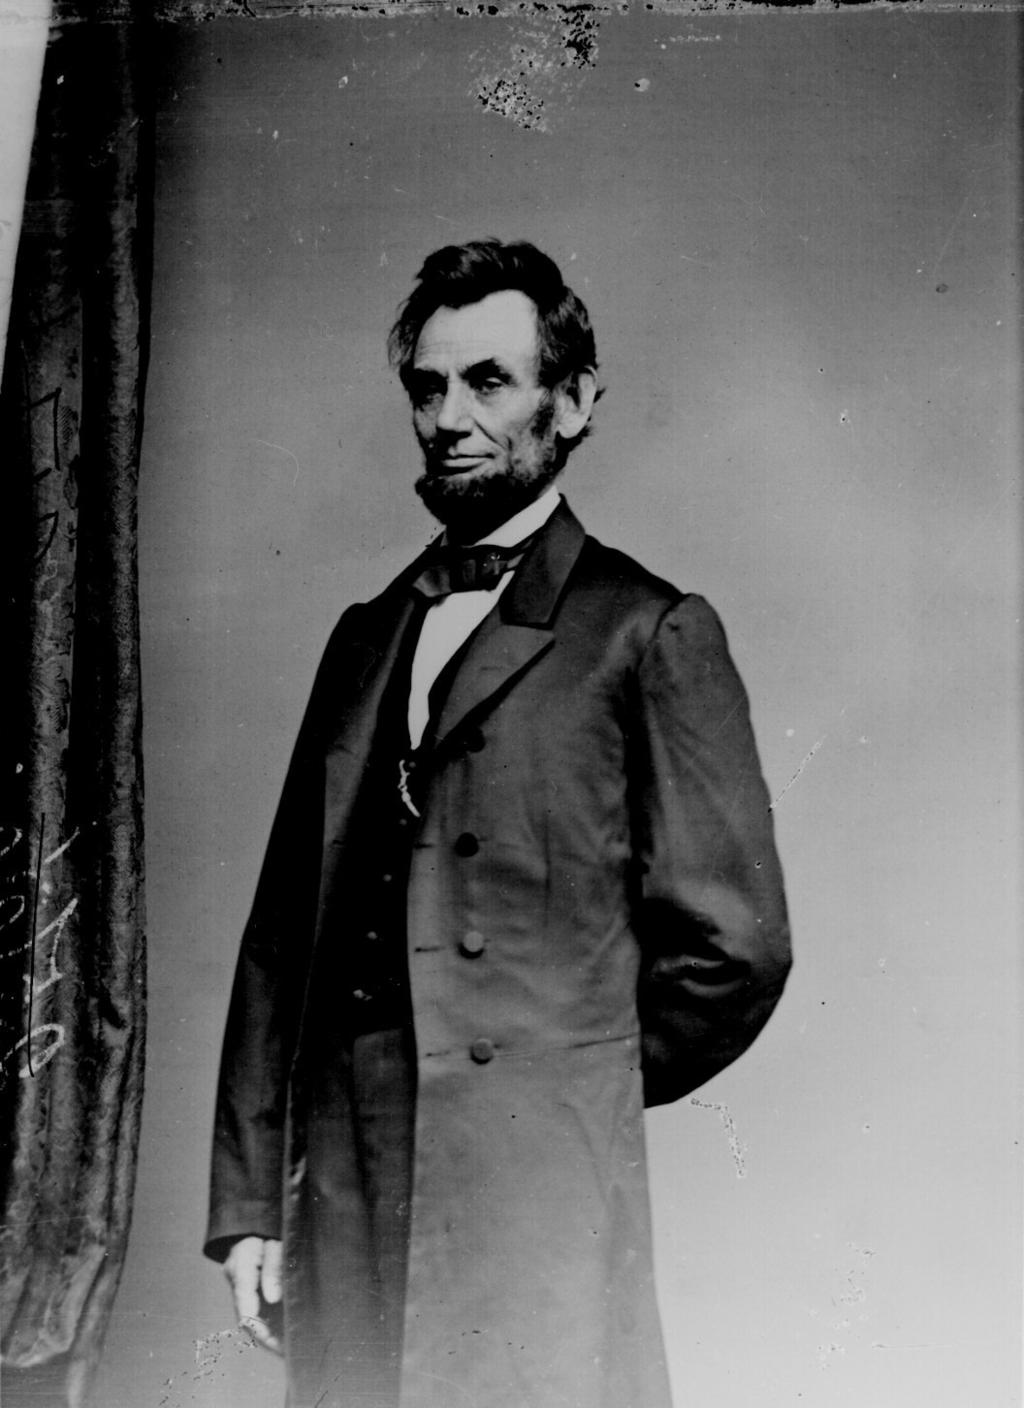 Lincoln is said to have received a letter from a young girl telling a tale of how here siblings would surely vote